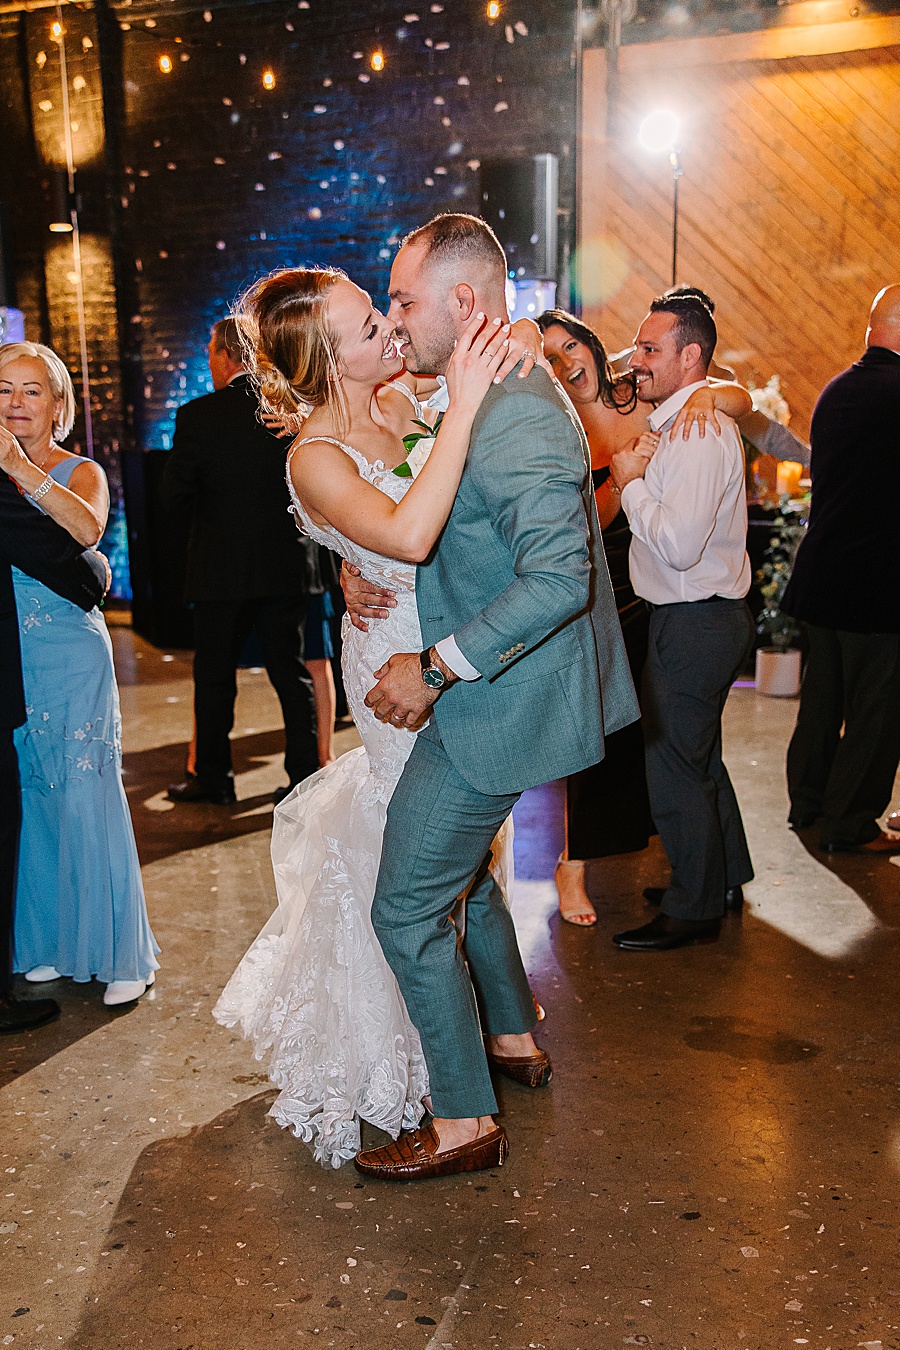 Bride & Groom dancing at reception at Jackson Terminal events wedding in Knoxville TN by Mandy Hart Photo, Knoxville TN Wedding Photographer